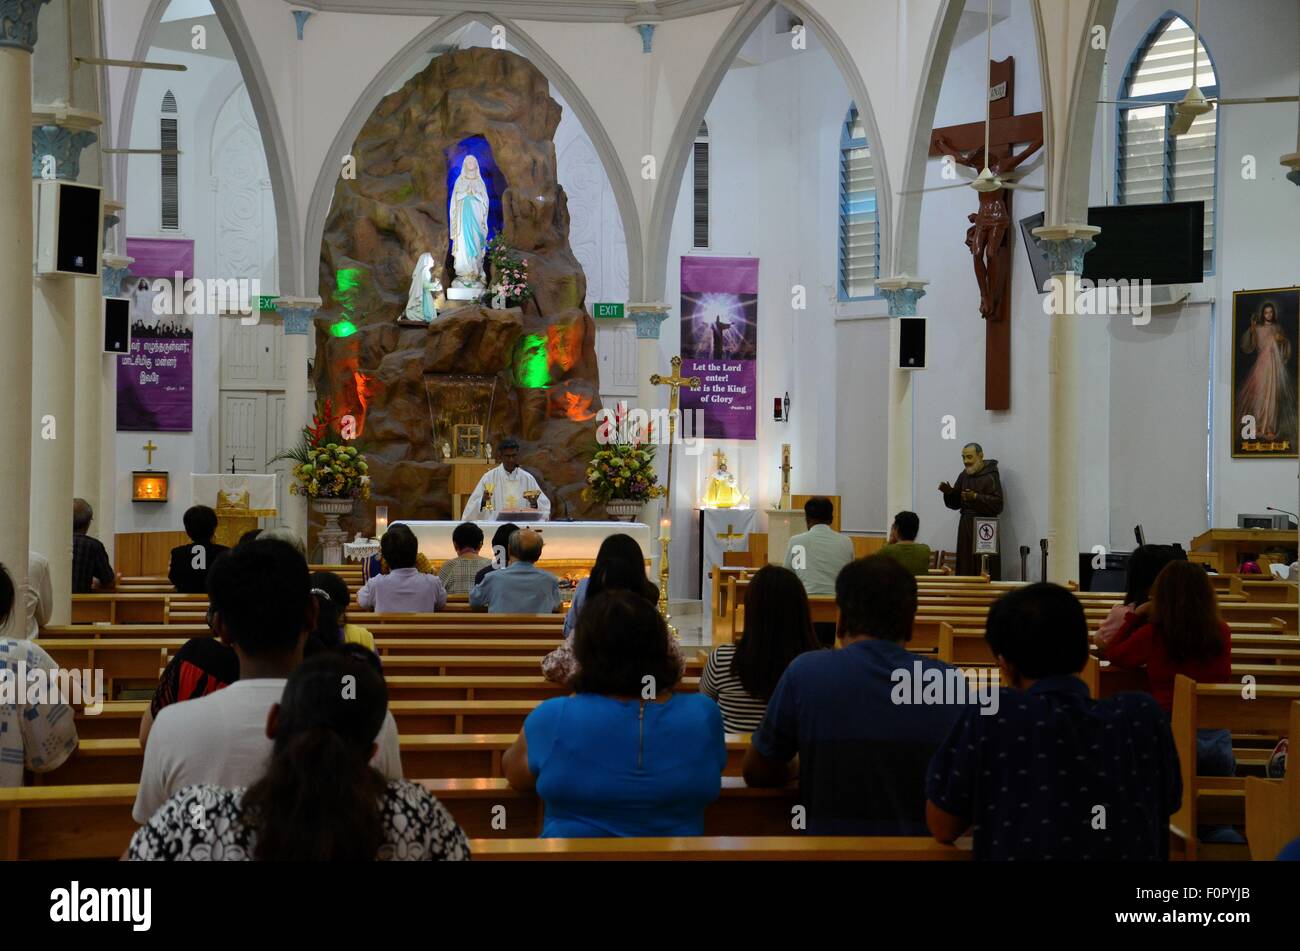 Our Lady of Lourdes Tamil Catholic Church in Little India Singapore Stock Photo